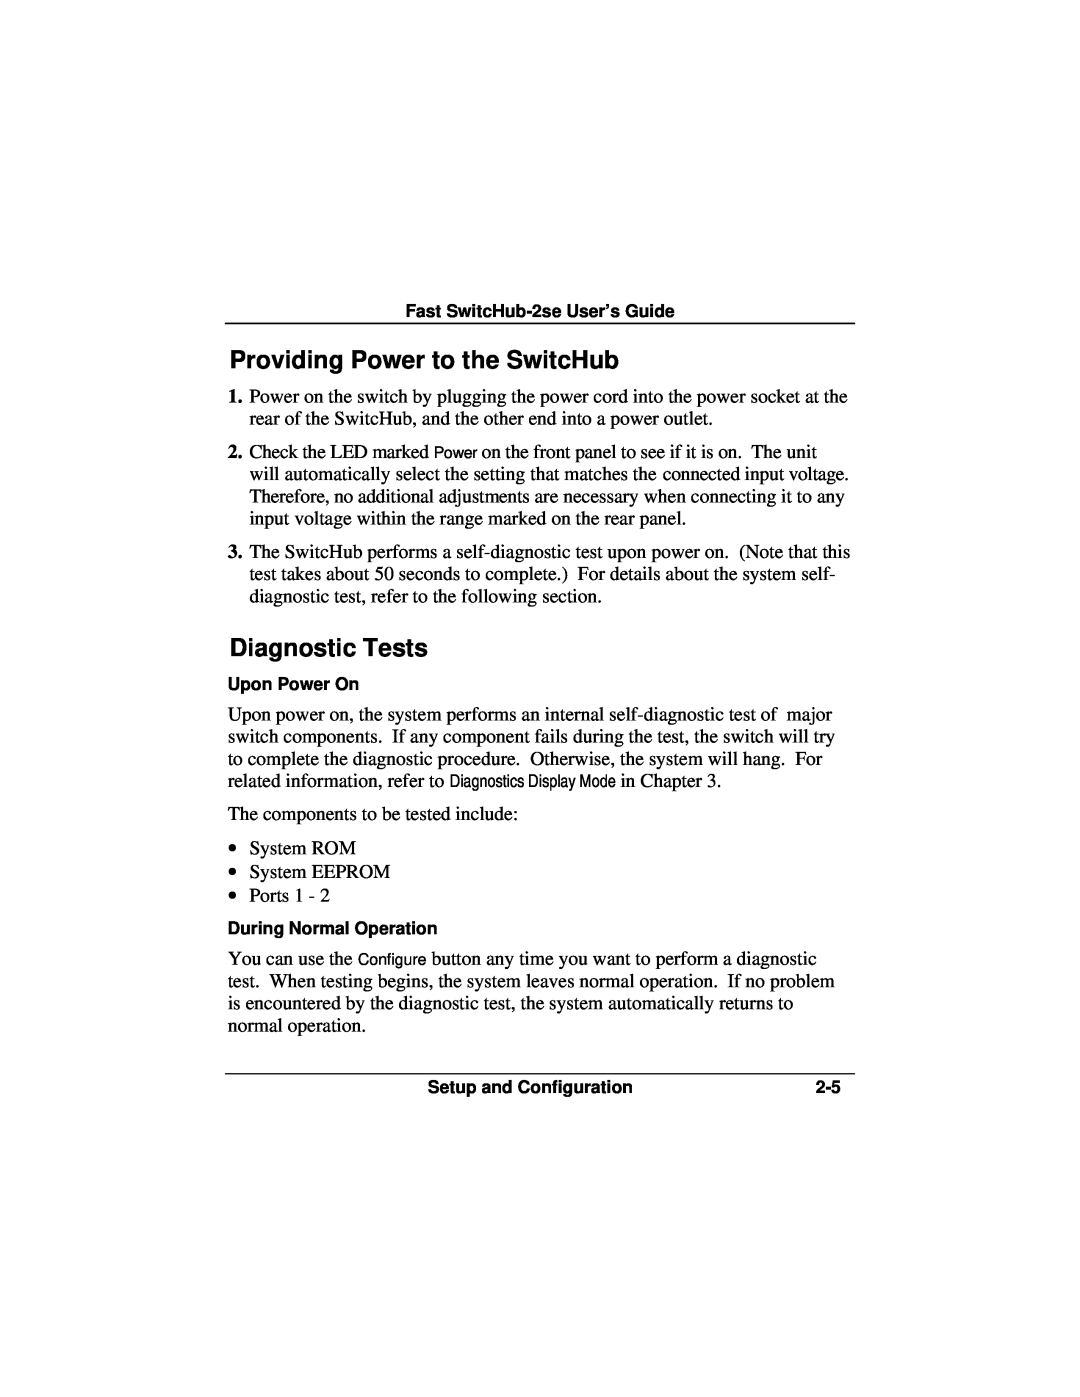 Accton Technology ES3002-TF manual Providing Power to the SwitcHub, Diagnostic Tests 